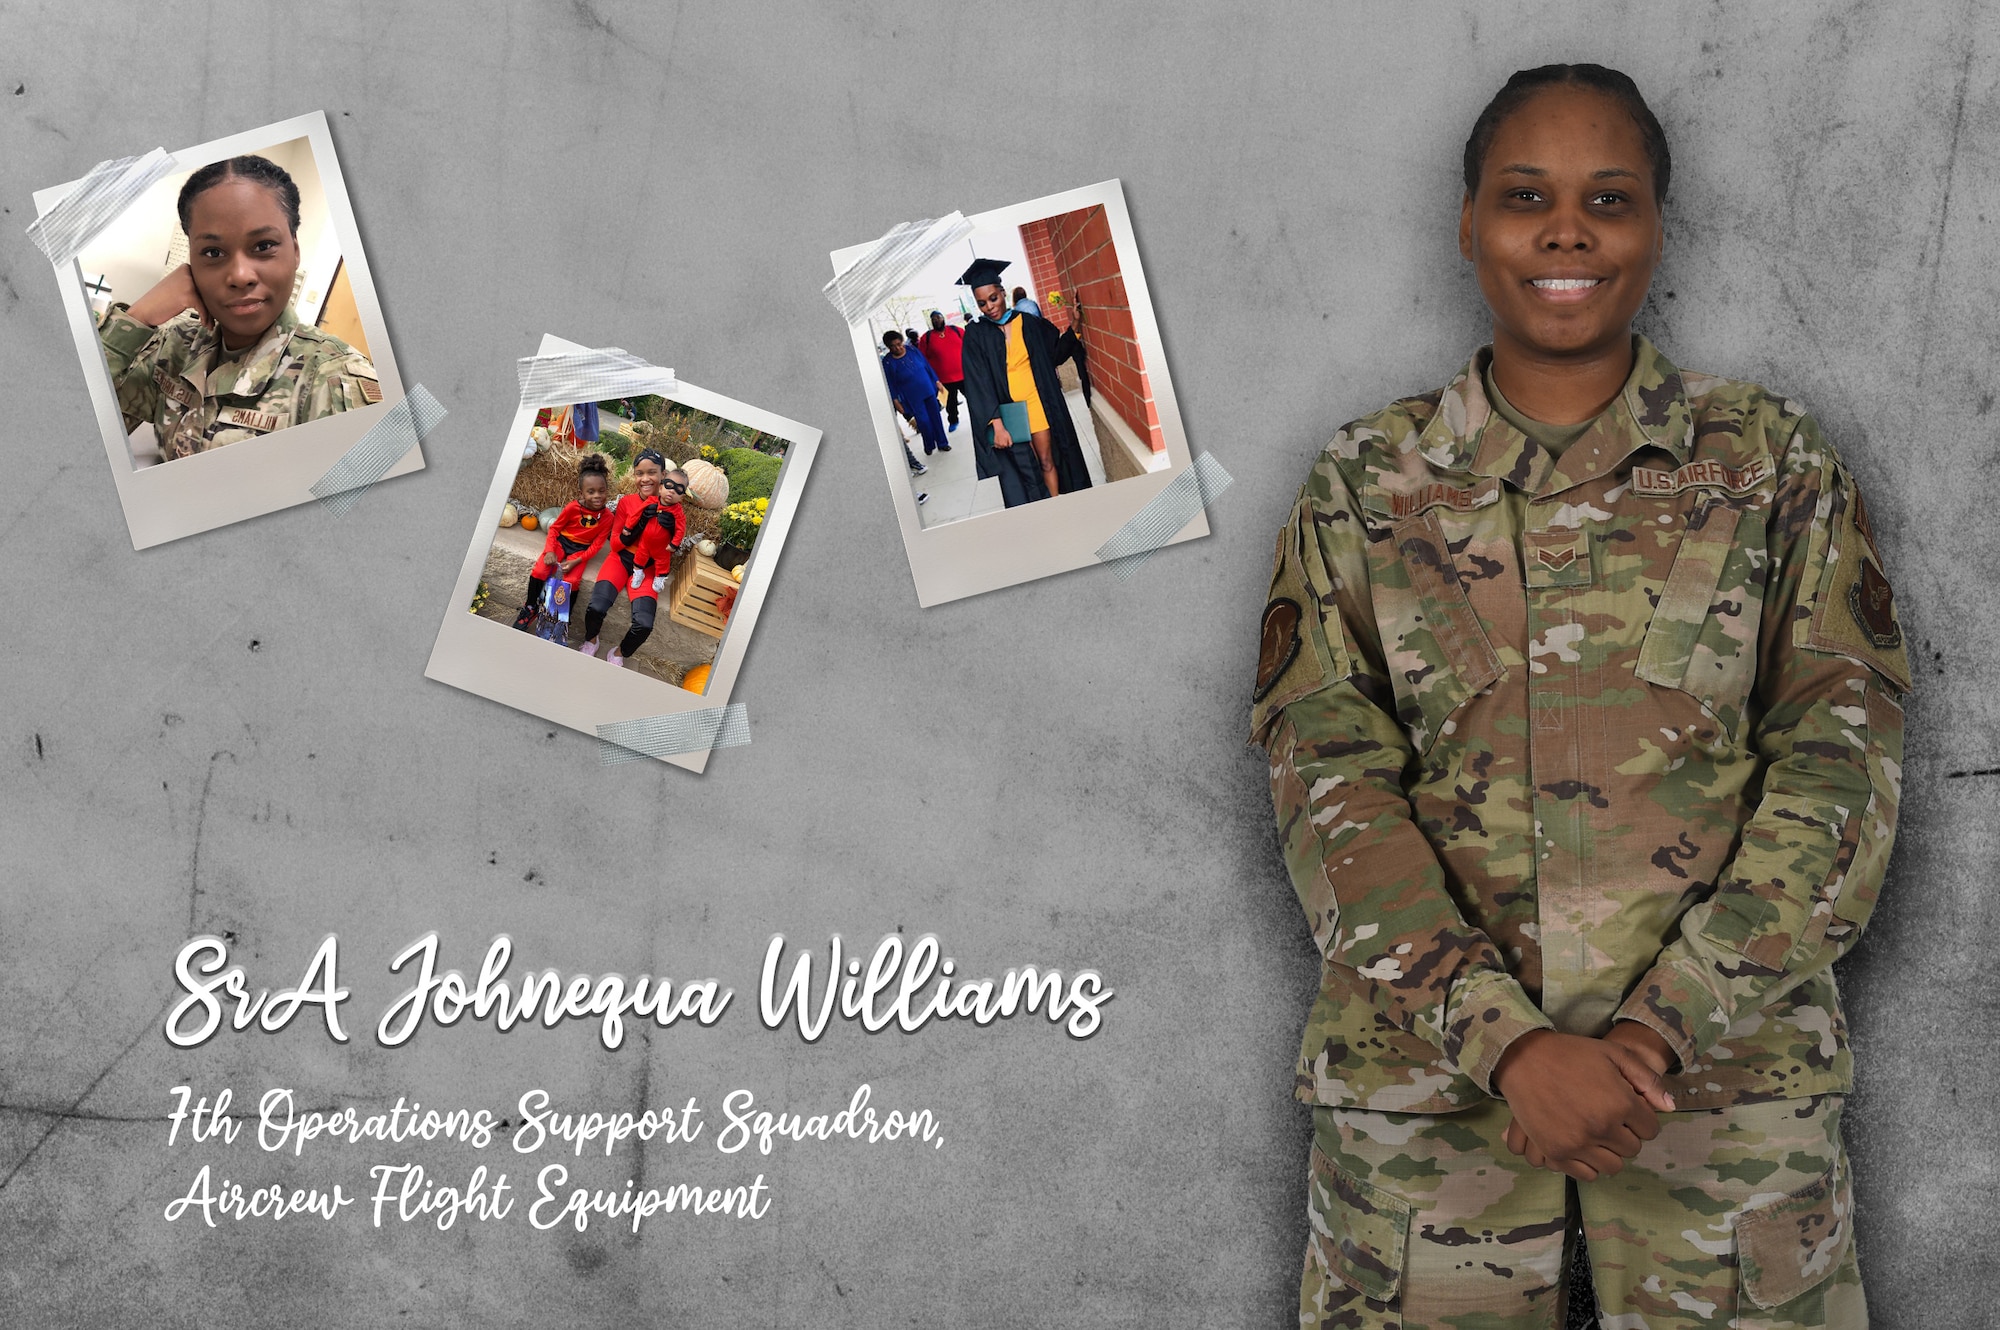 This Women's History Month, we celebrate the resilience and determination of women who overcome challenging circumstances to achieve their goals. One such woman is Senior Airman Johnequa Williams, who grew up in a two bedroom house with a hard-working single mother and three siblings. Despite facing financial challenges, she found joy in participating in school sports and activities.